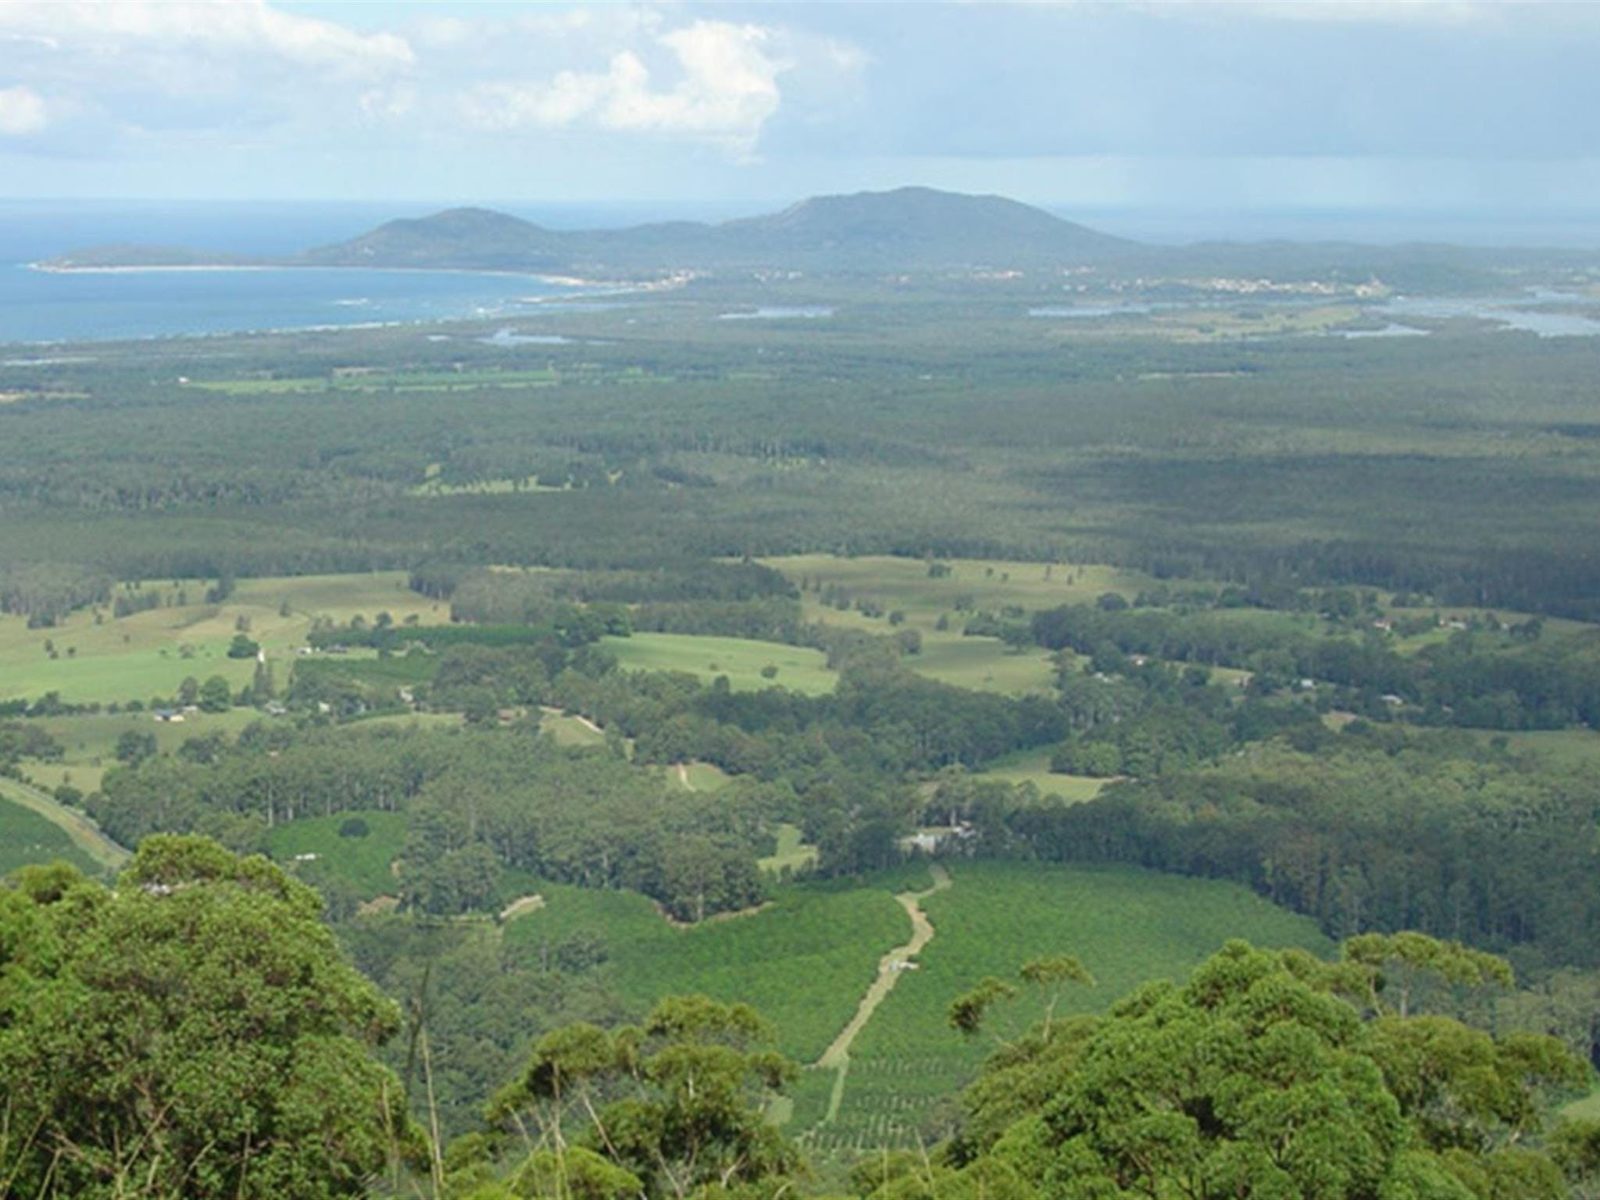 Yarriabini lookout, Yarriabini National Park. Photo: A Turbill/NSW Government